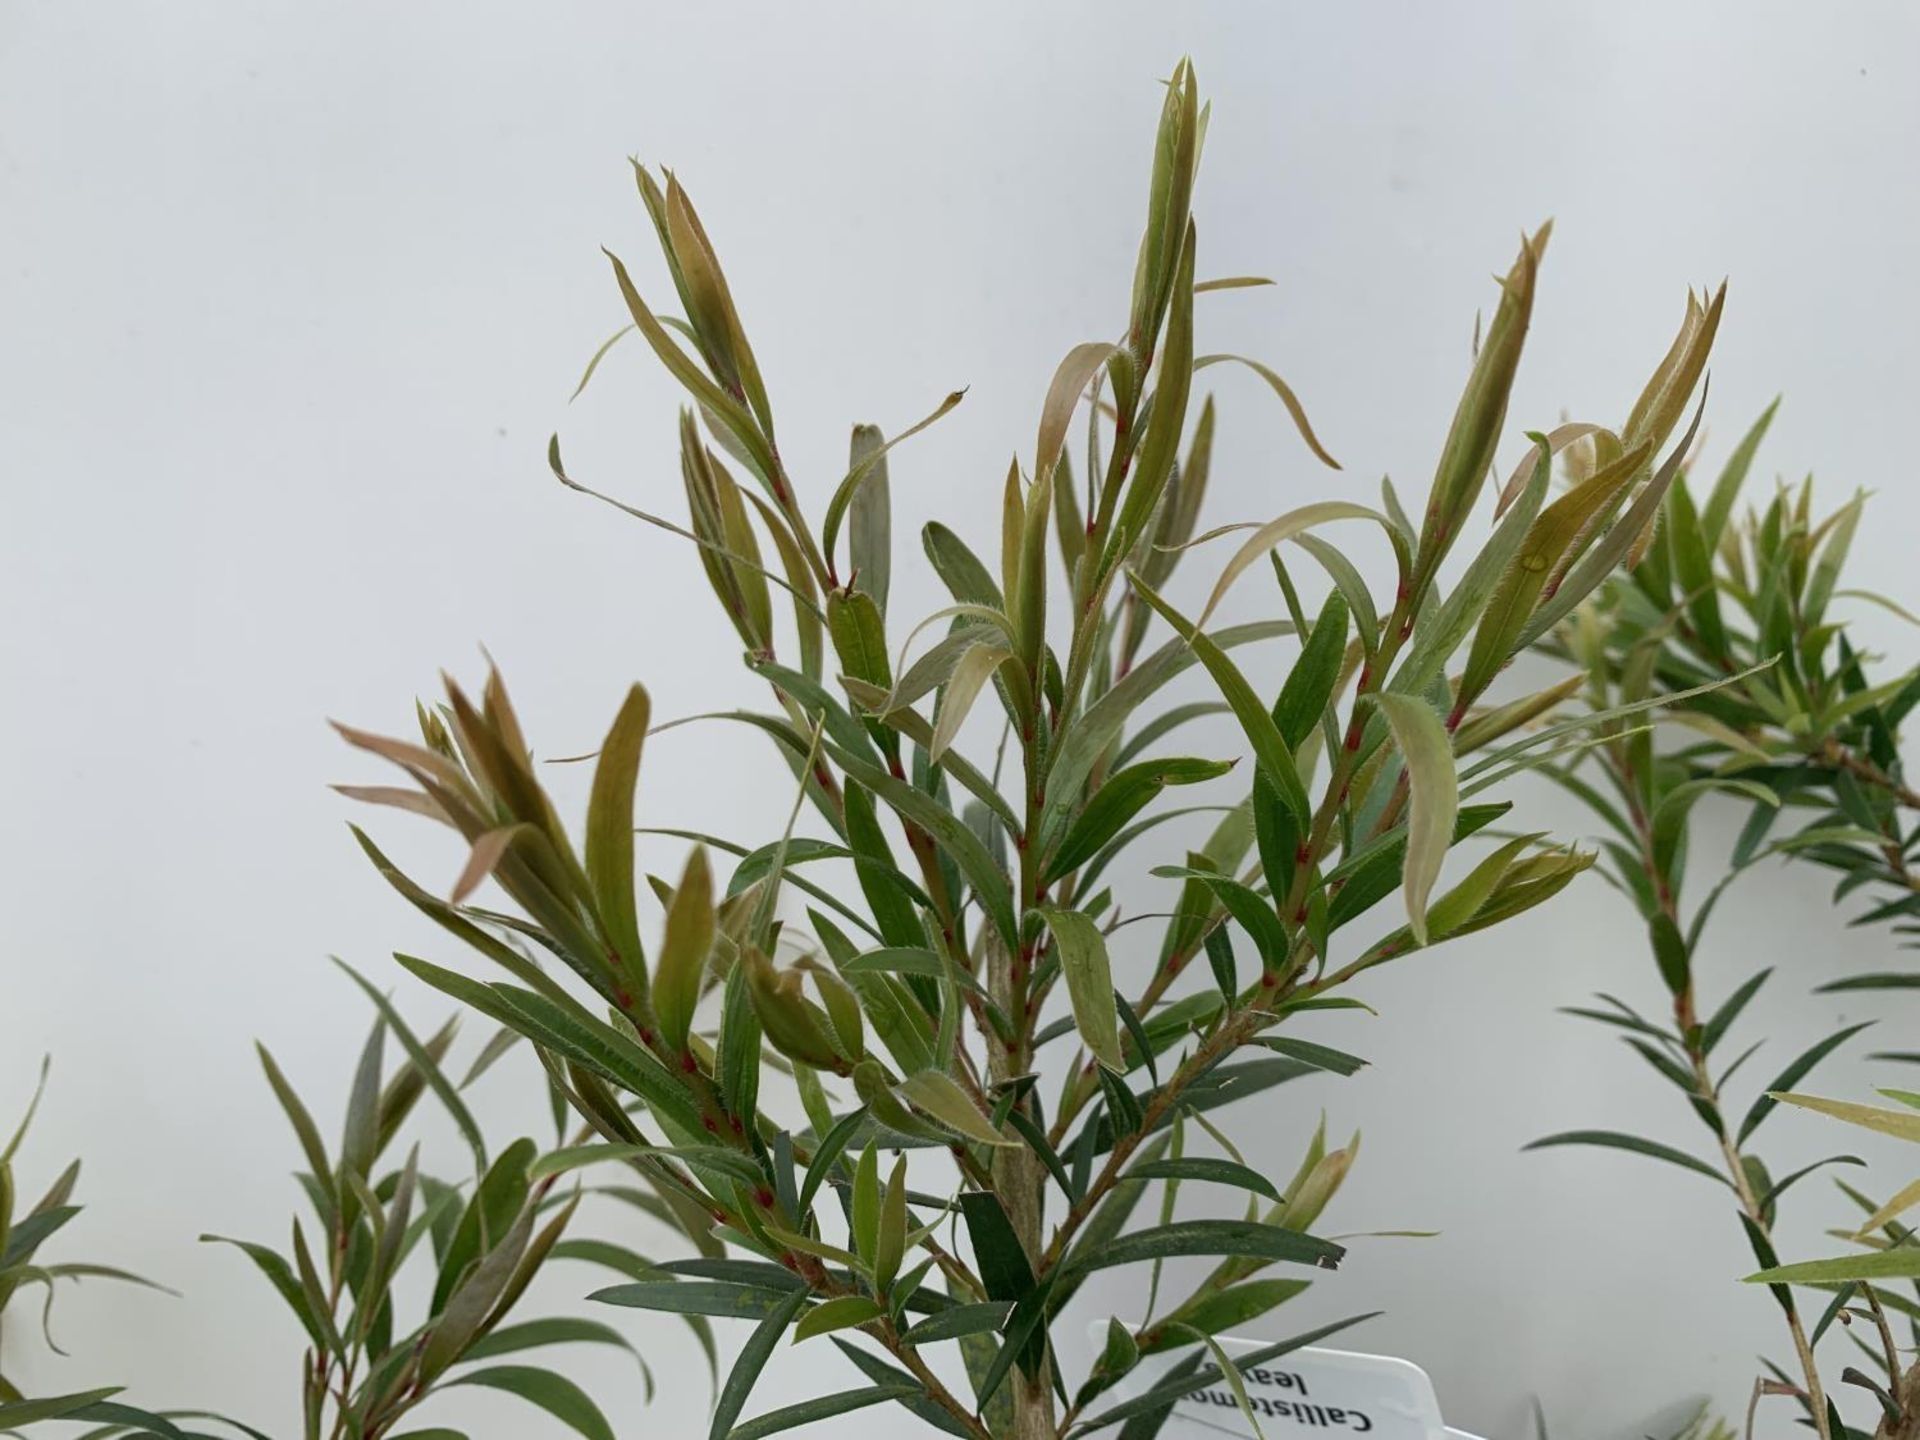 TWO CALLISTEMON LAEVIS IN 2 LTR POTS 50CM IN HEIGHT PLUS VAT TO BE SOLD FOR THE TWO - Image 6 of 8